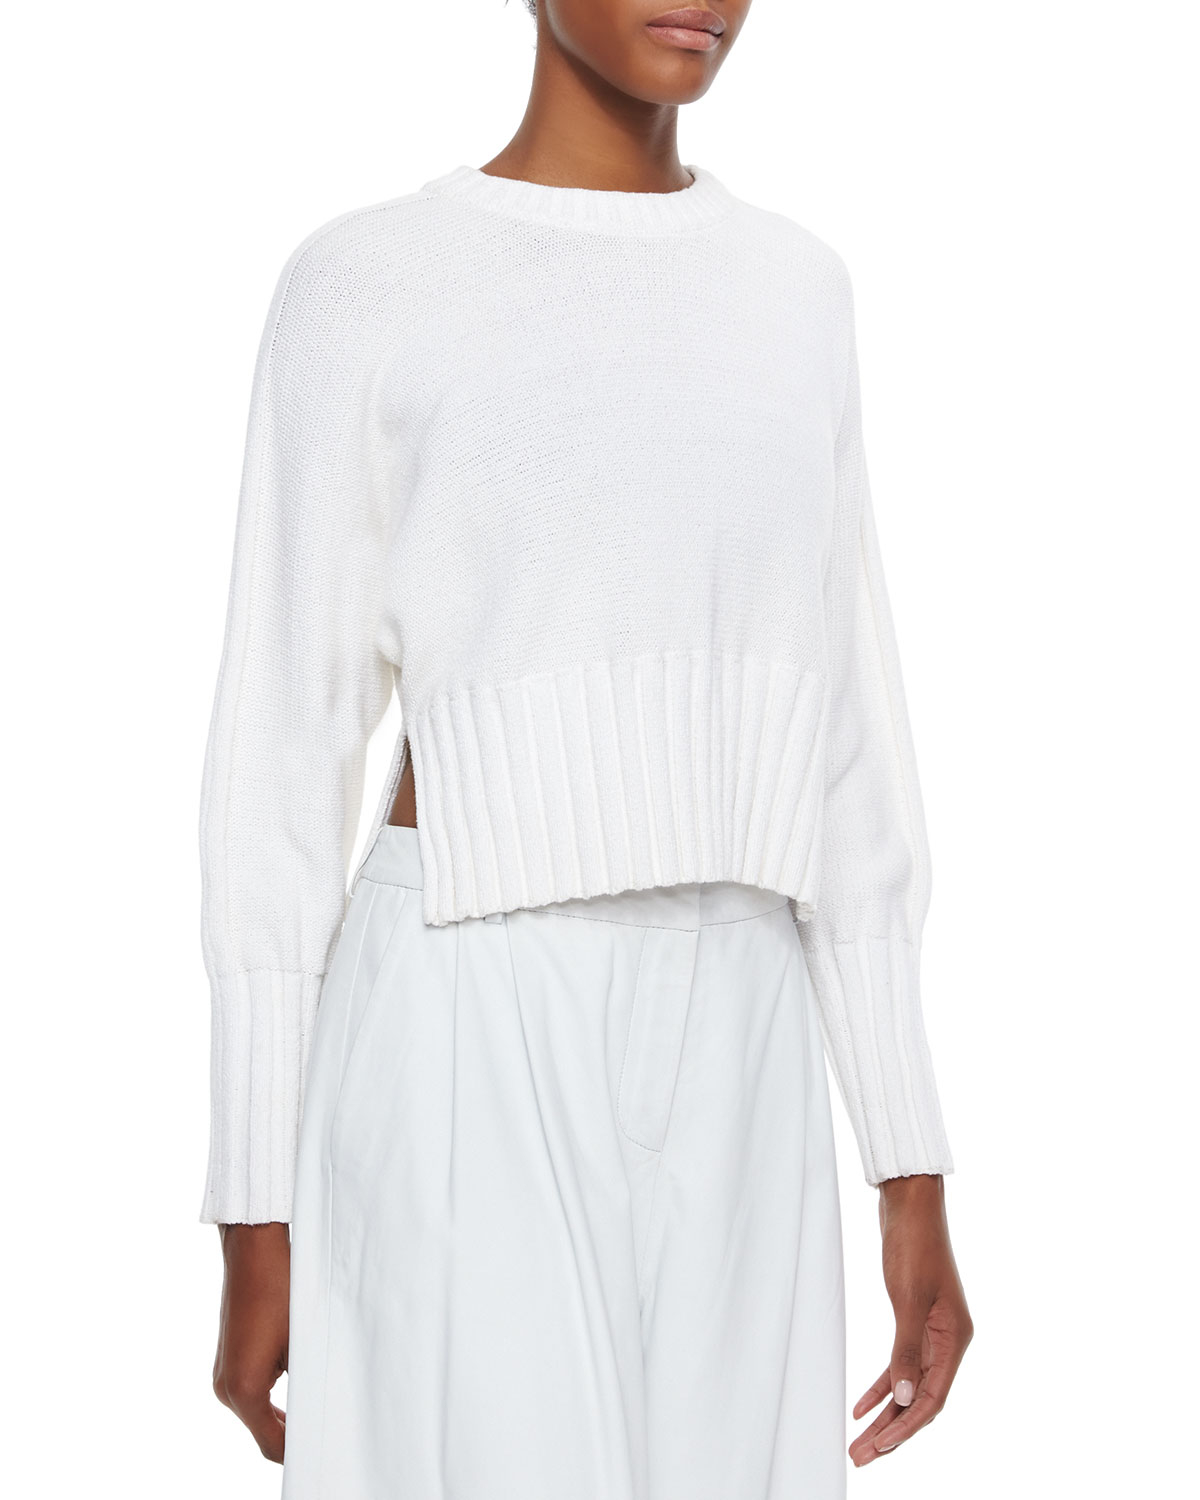 T by alexander wang Chunky Knit Cropped Pullover Sweater in White ...